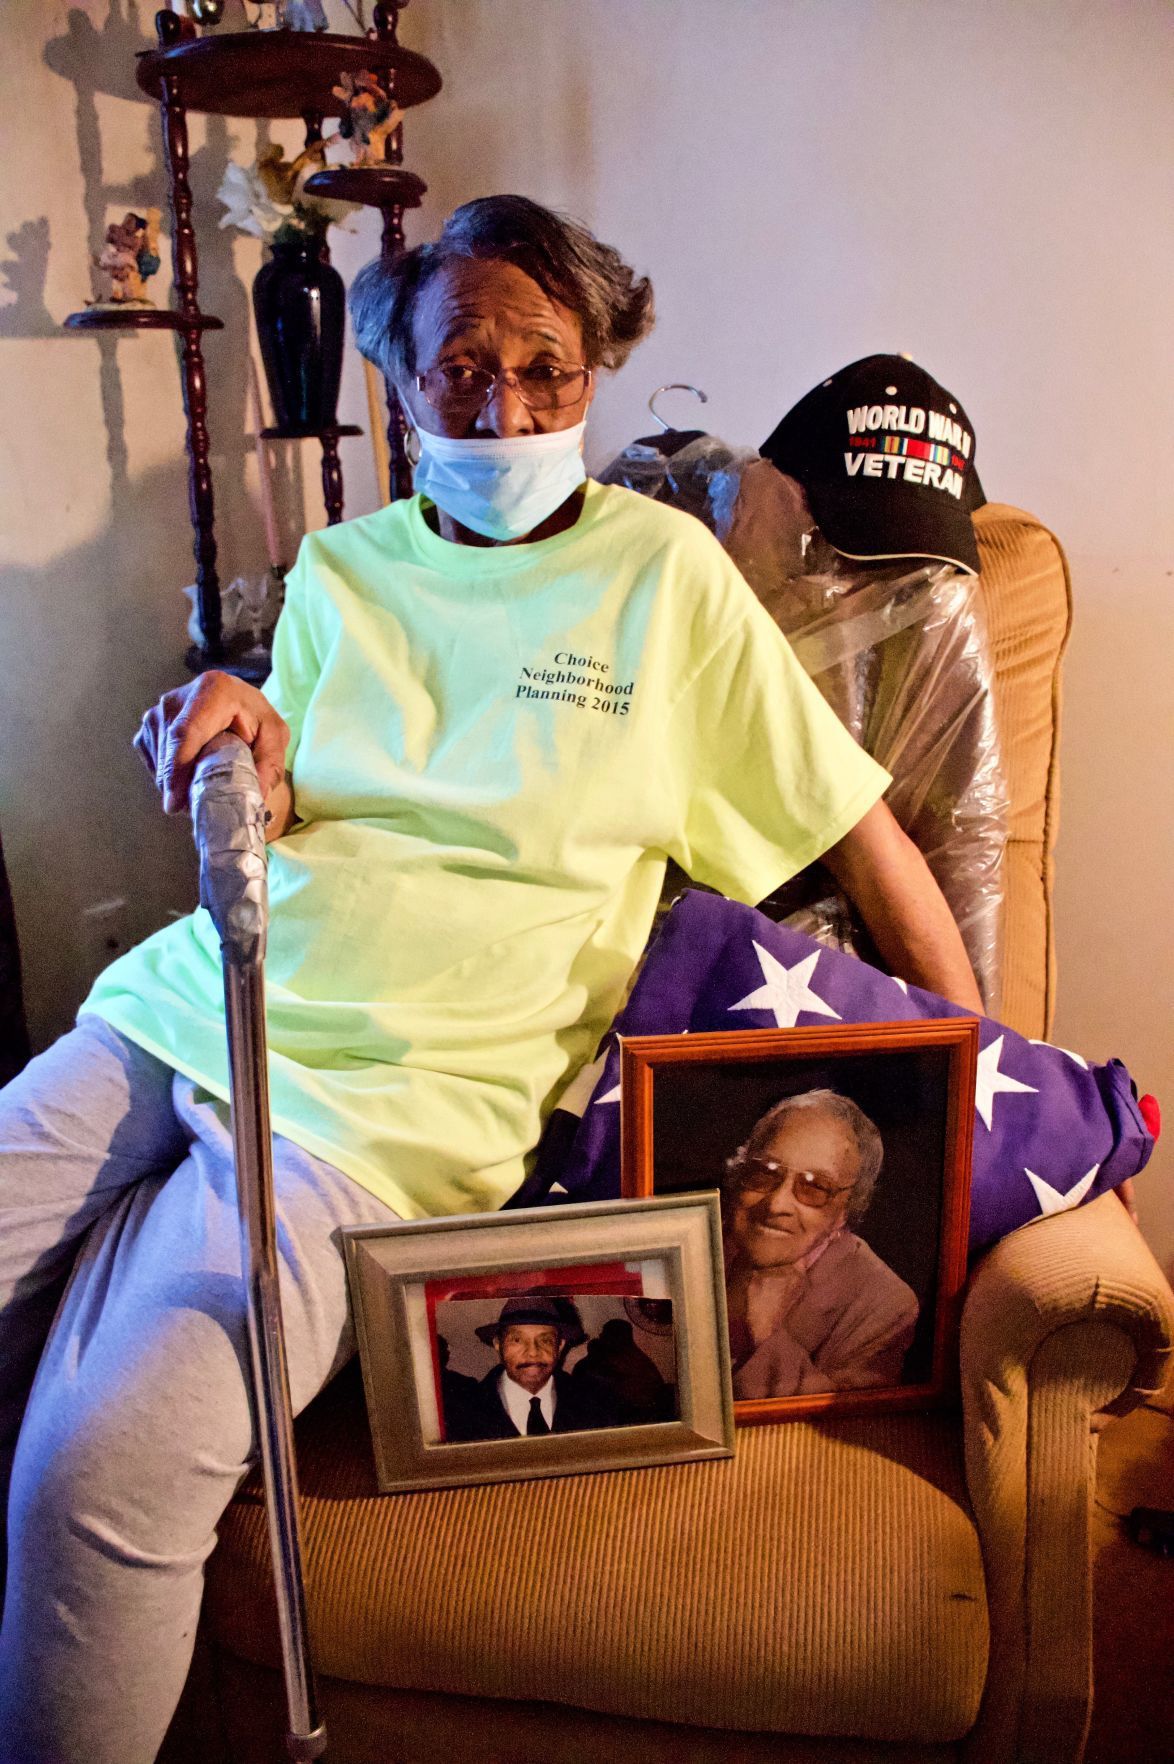 Valerie Nichols poses with photos of her mother, Willie Mae Nichols, and father, Anthony Nichols at her home in Preservation Square. Her father is deceased and her mother is living at Grand Manor Nursing and Rehabilitation Center. Image by Wiley Price/St. Louis American. United States, 2020.